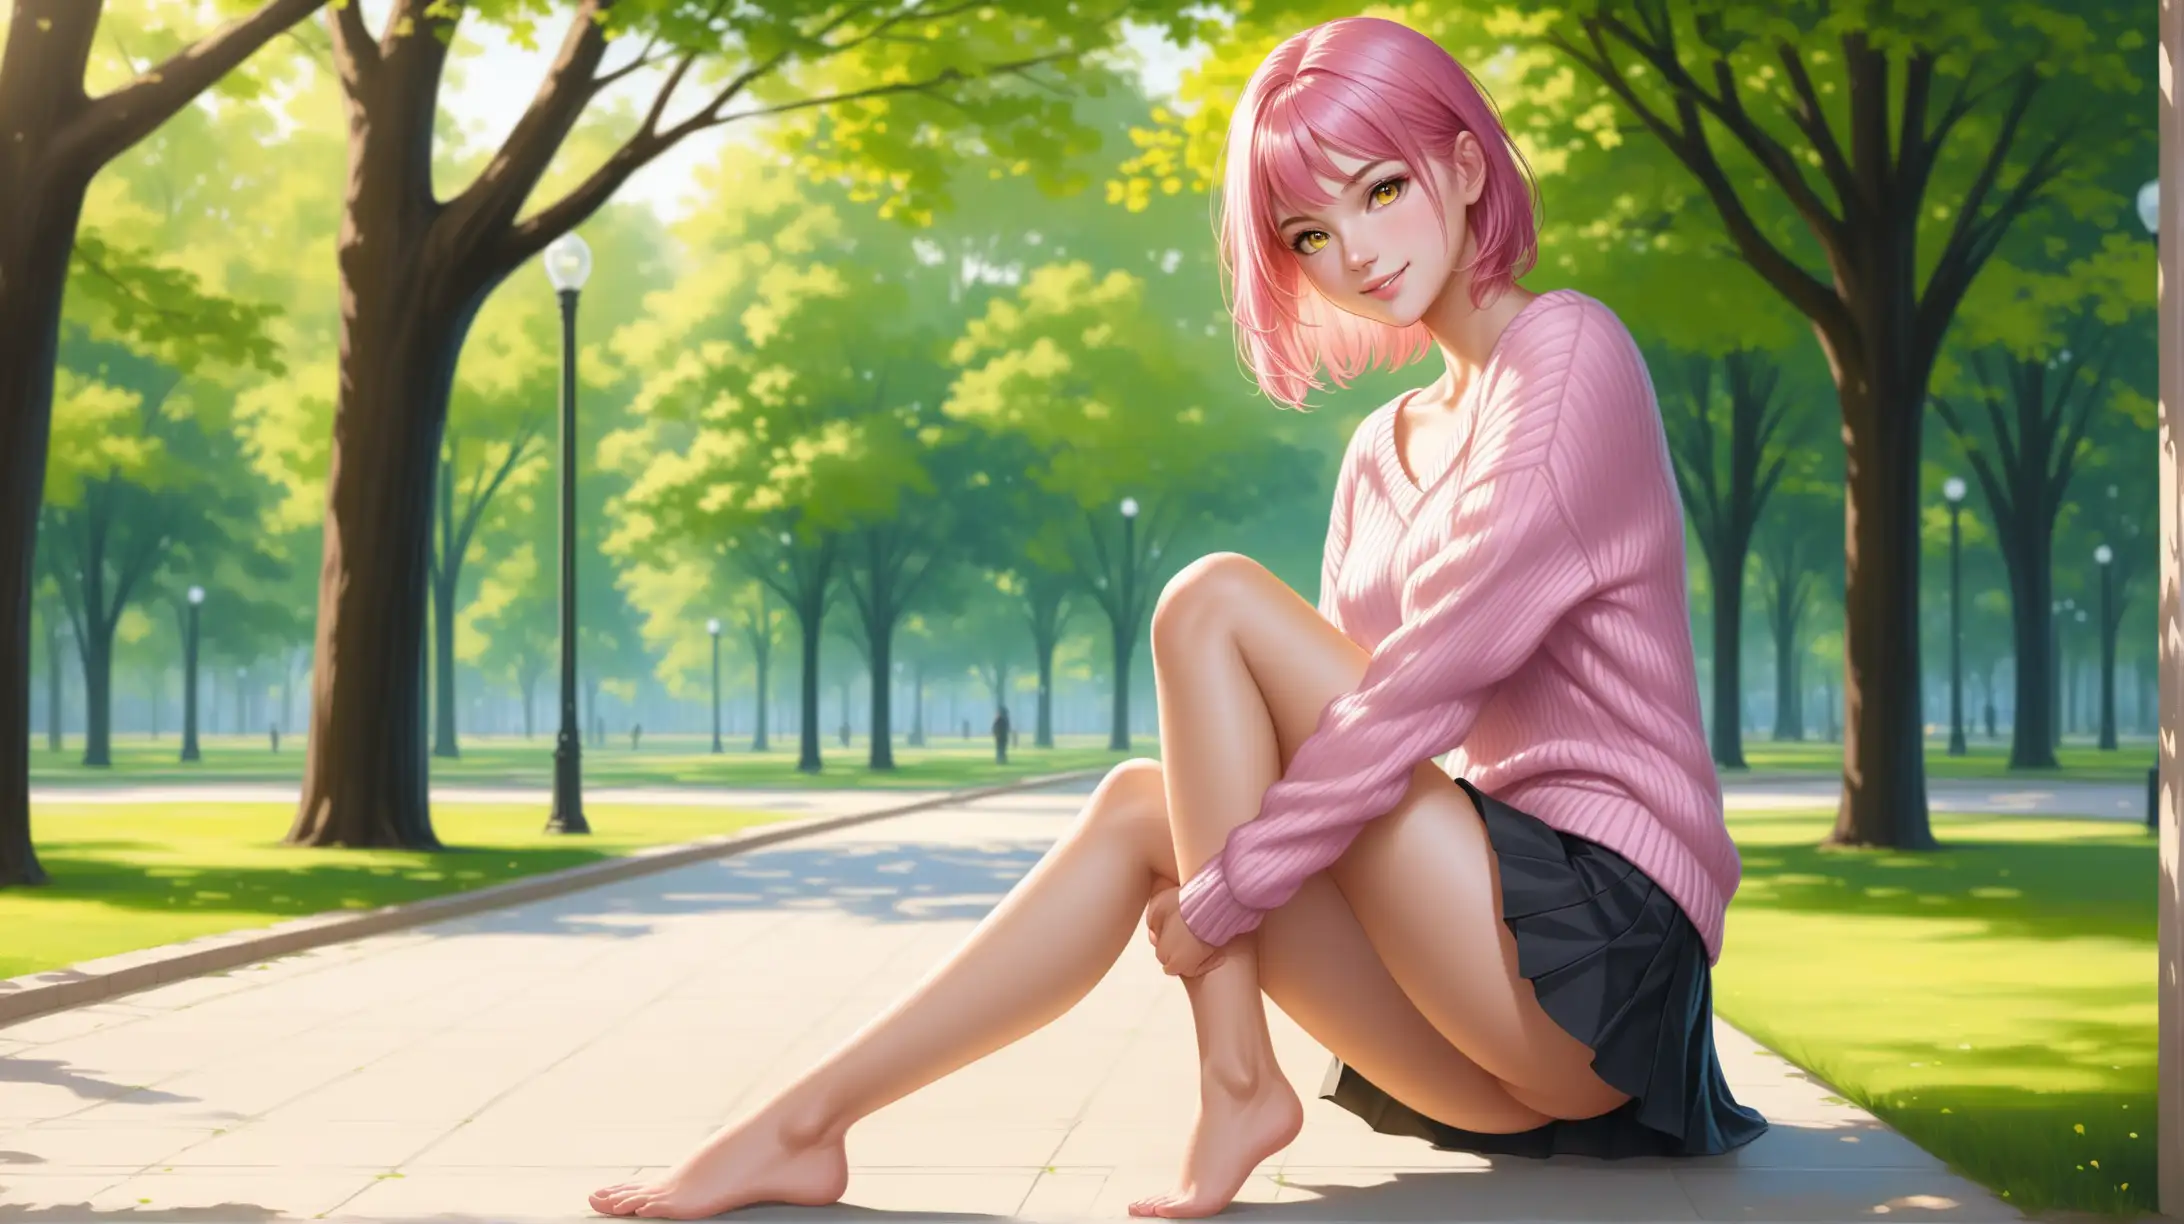 Draw a woman, short pink hair, yellow ringed eyes, slender figure, high quality, realistic, accurate, detailed, long shot, full body, outdoors, park, natural lighting, open-chest sweater, skirt, seductive pose, smiling toward viewer